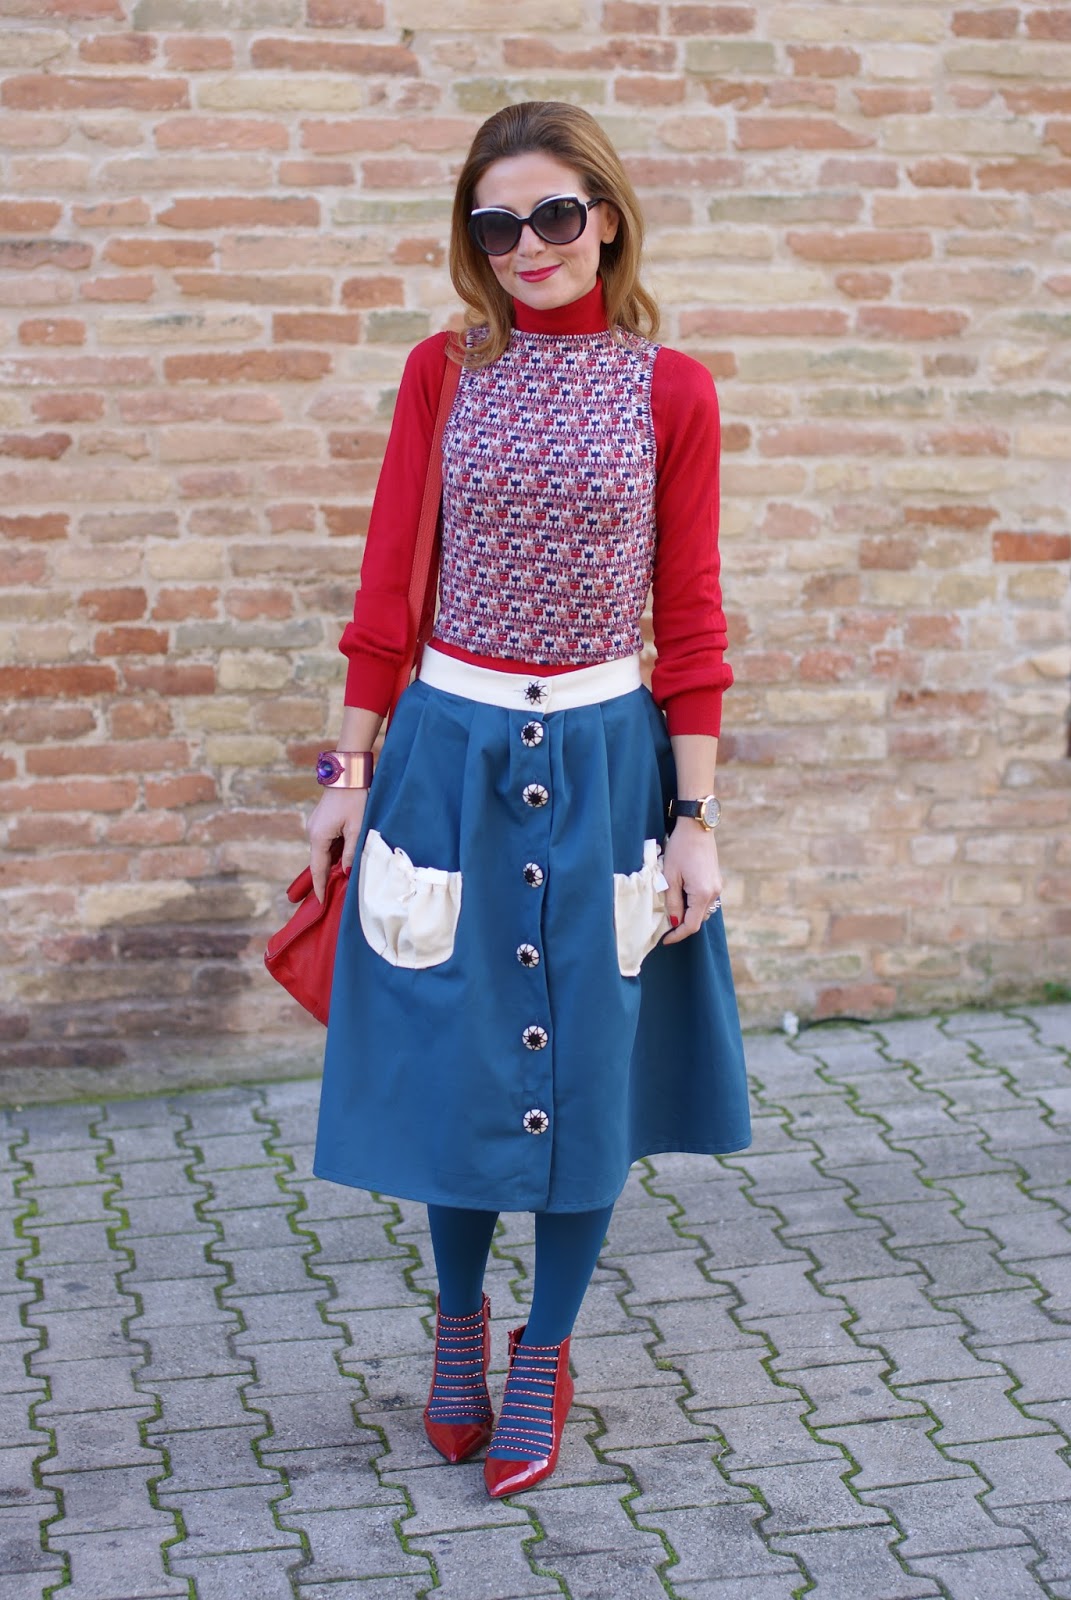 Opposés Complémentaires buttoned midi skirt, Le Silla heels and Gioya Bijoux bracelet on Fashion and Cookies fashion blog, fashion blogger style